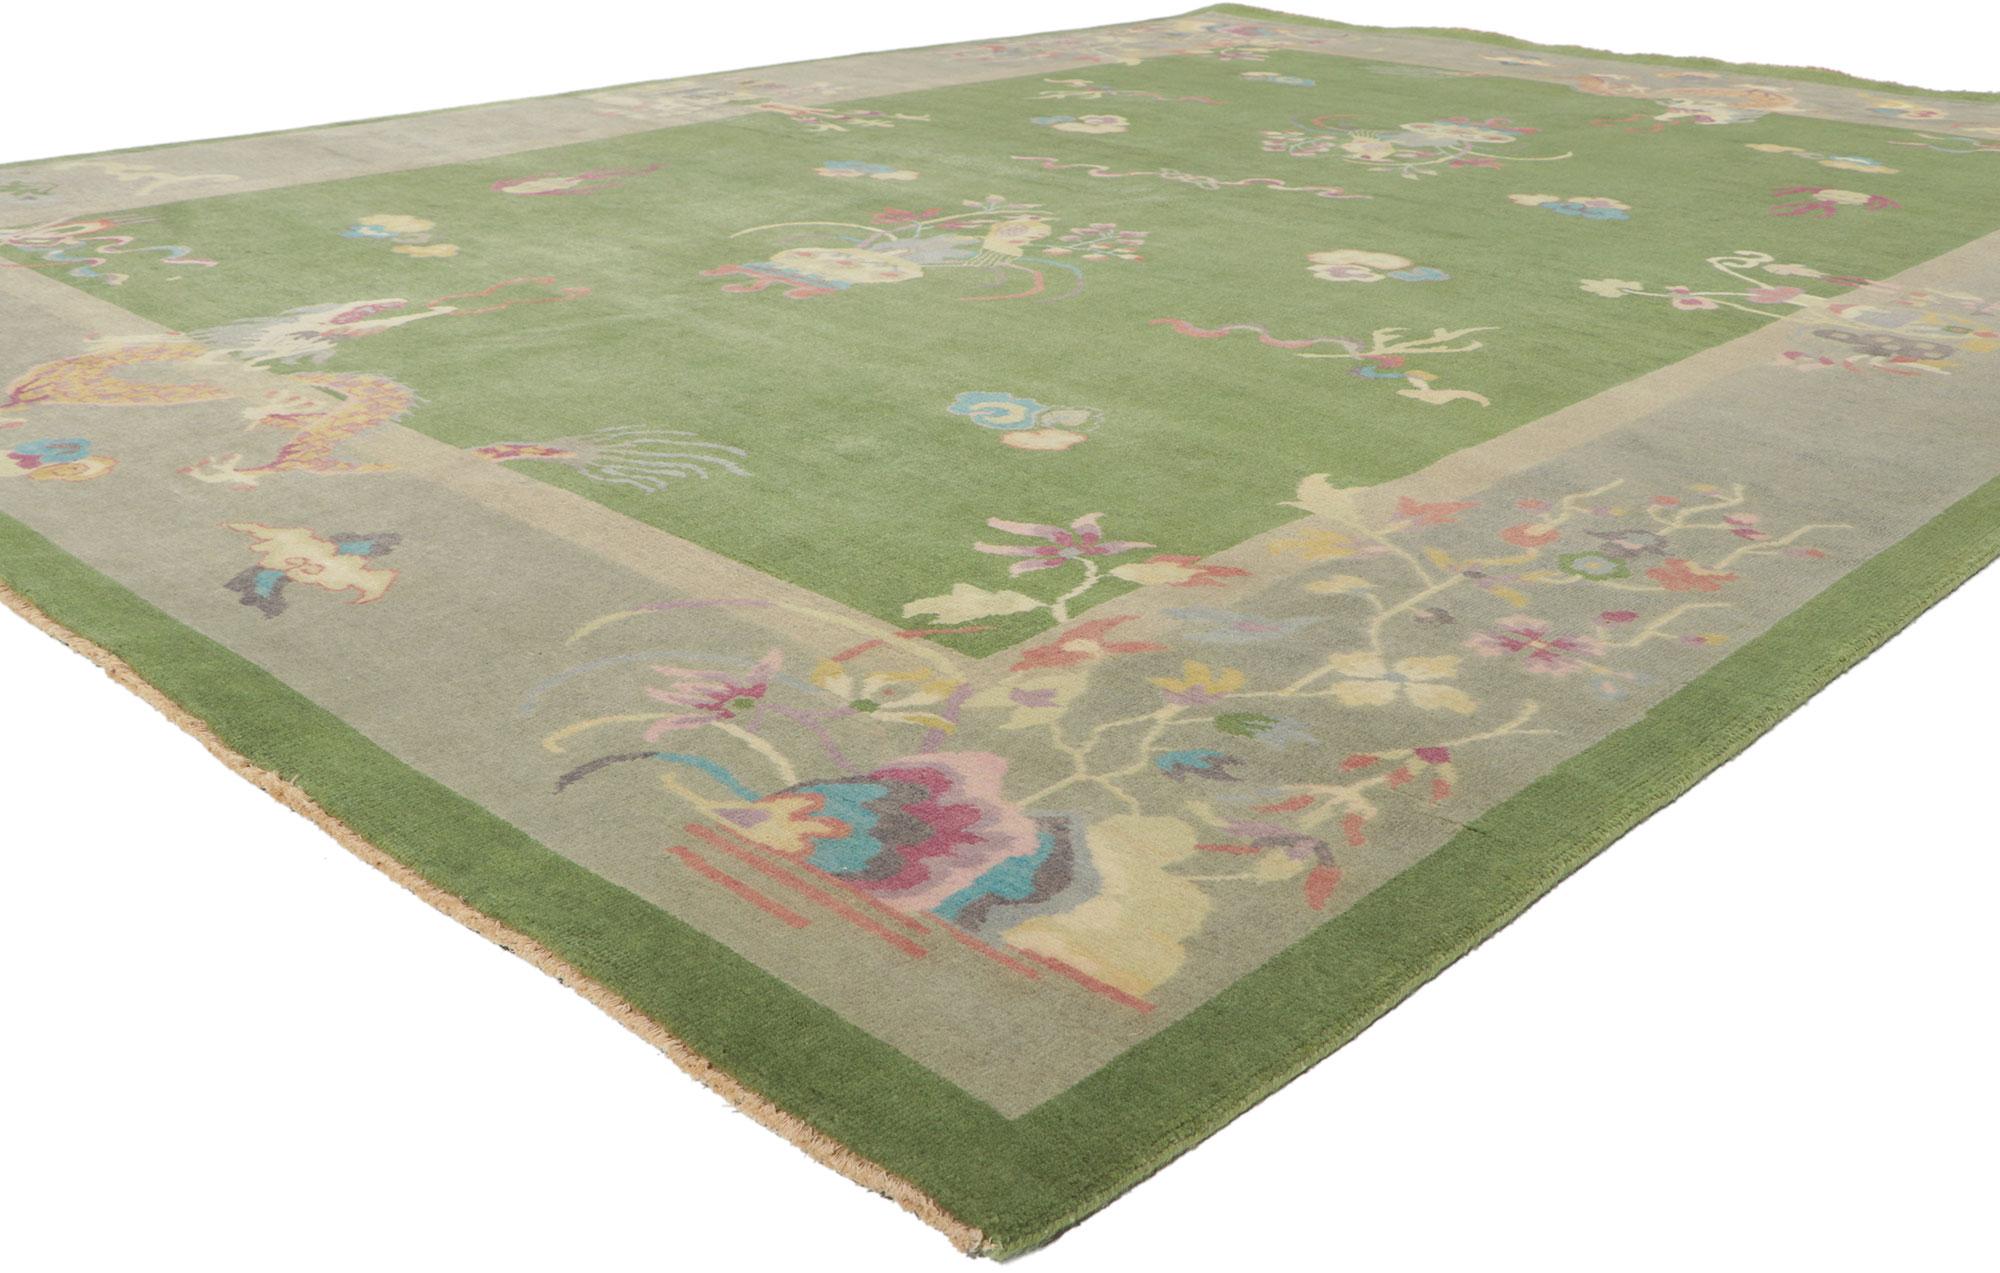 30921 New Chinese Art Deco Rug with Maximalist Style, 09'01 x 12'00.
Emanating maximalism with incredible detail and lavish texture, this Chinese Art Deco style rug is a captivating vision of woven beauty. The mythological imagery and vibrant